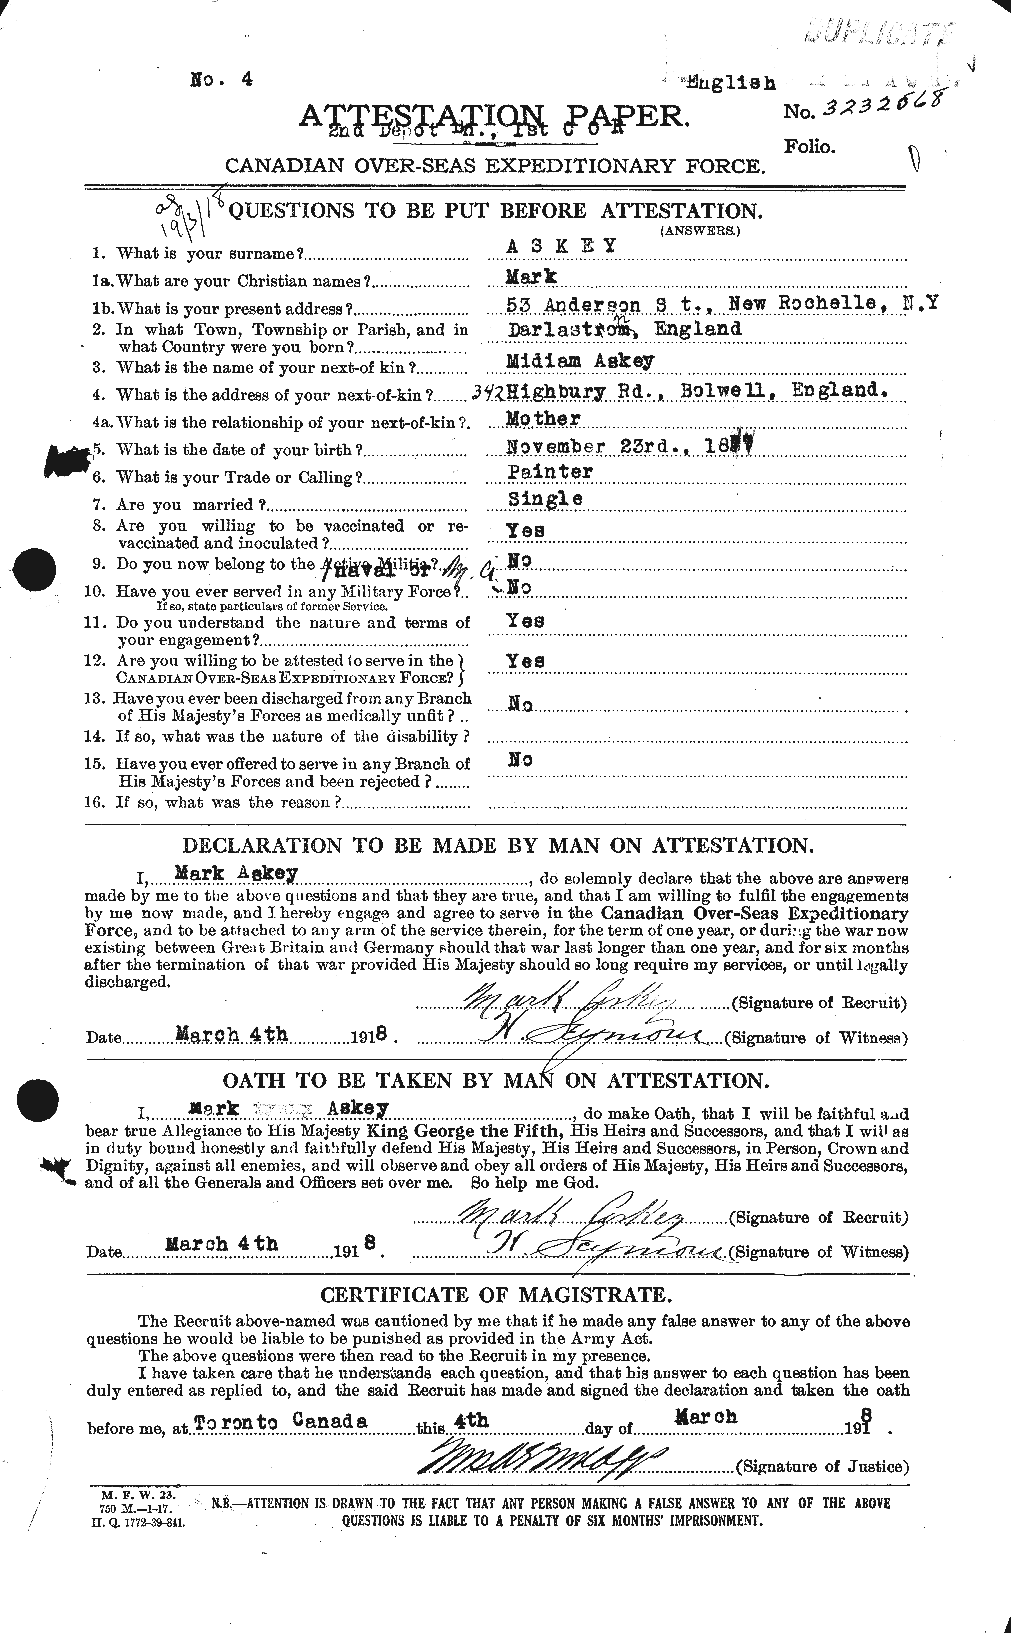 Personnel Records of the First World War - CEF 223658a